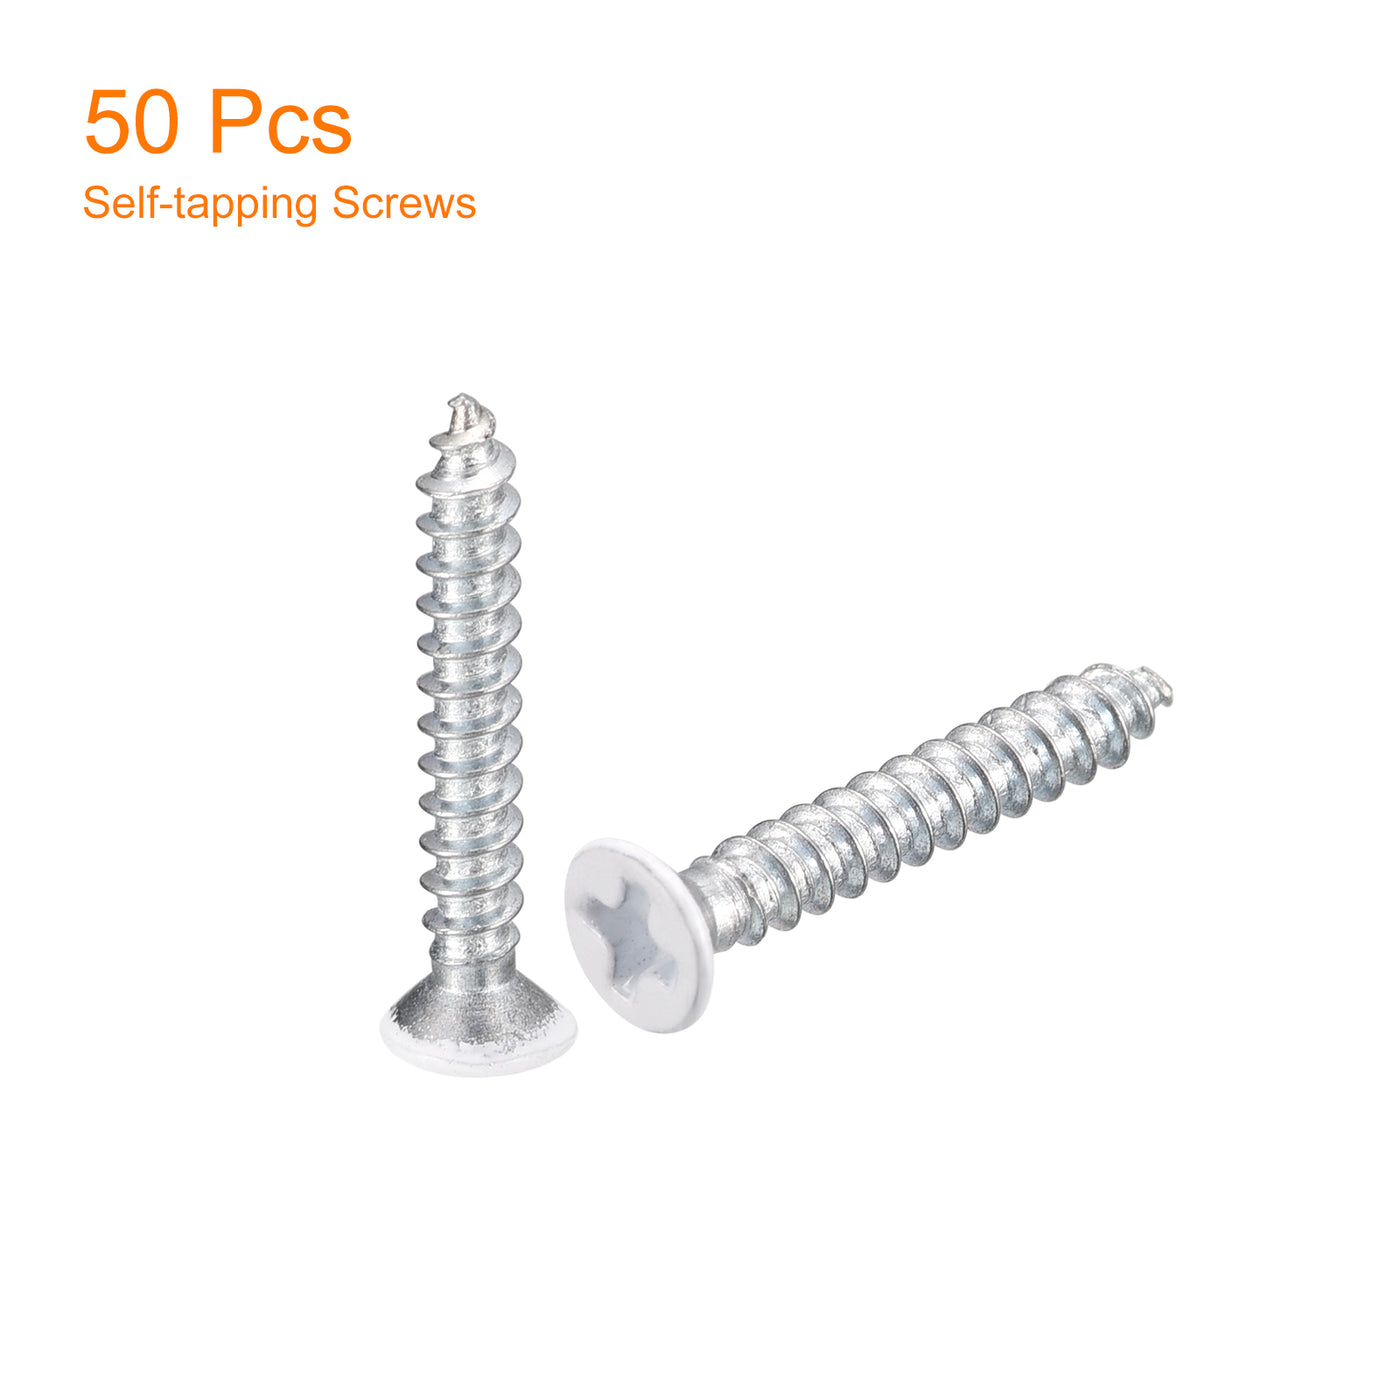 uxcell Uxcell ST3x20mm White Self Tapping Screws, 50pcs Flat Head Phillips Wood Screws